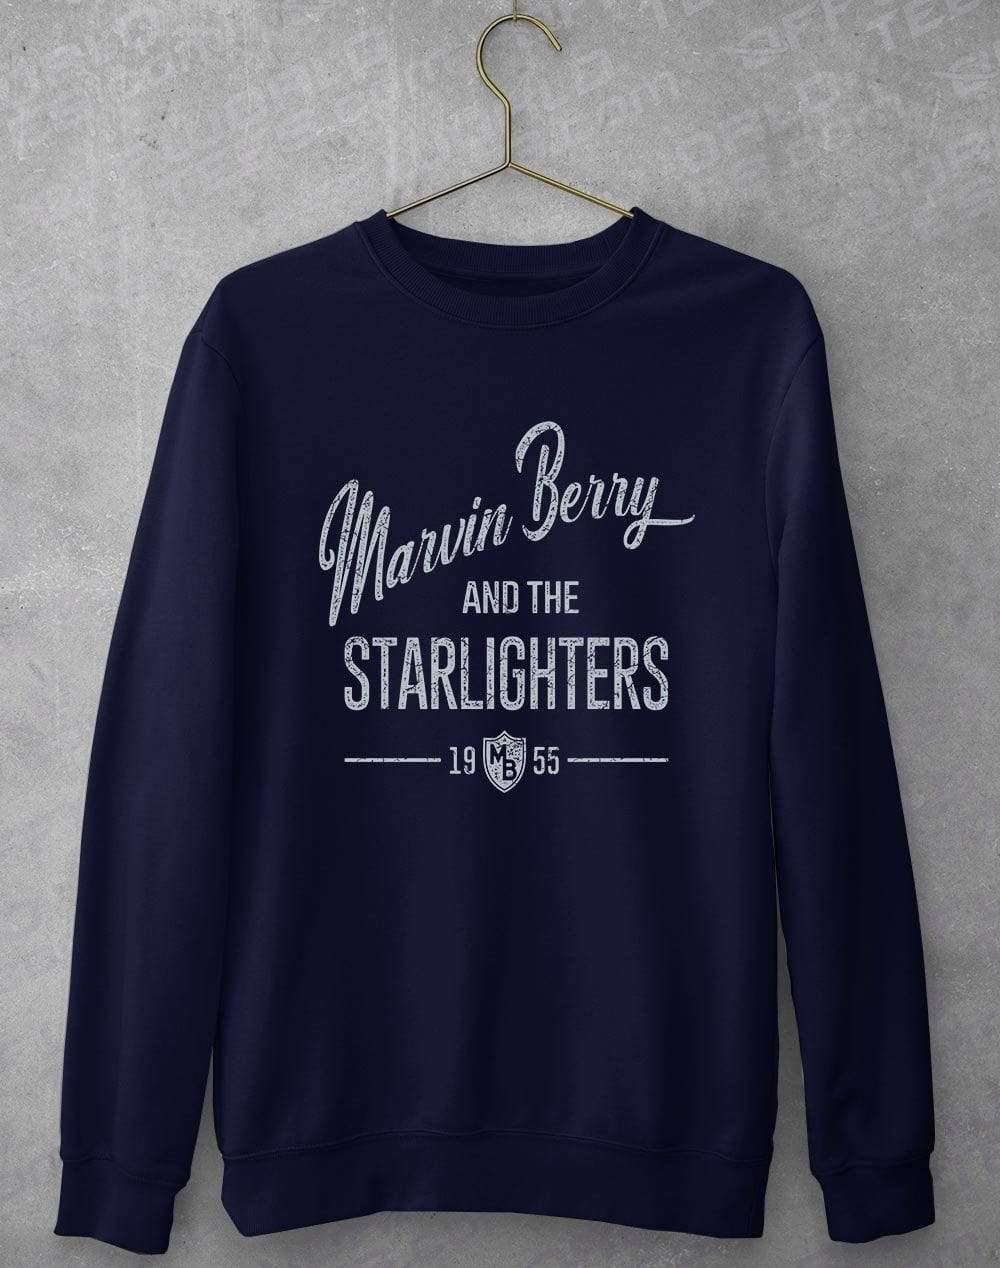 Marvin Berry and the Starlighters Sweatshirt S / Navy  - Off World Tees